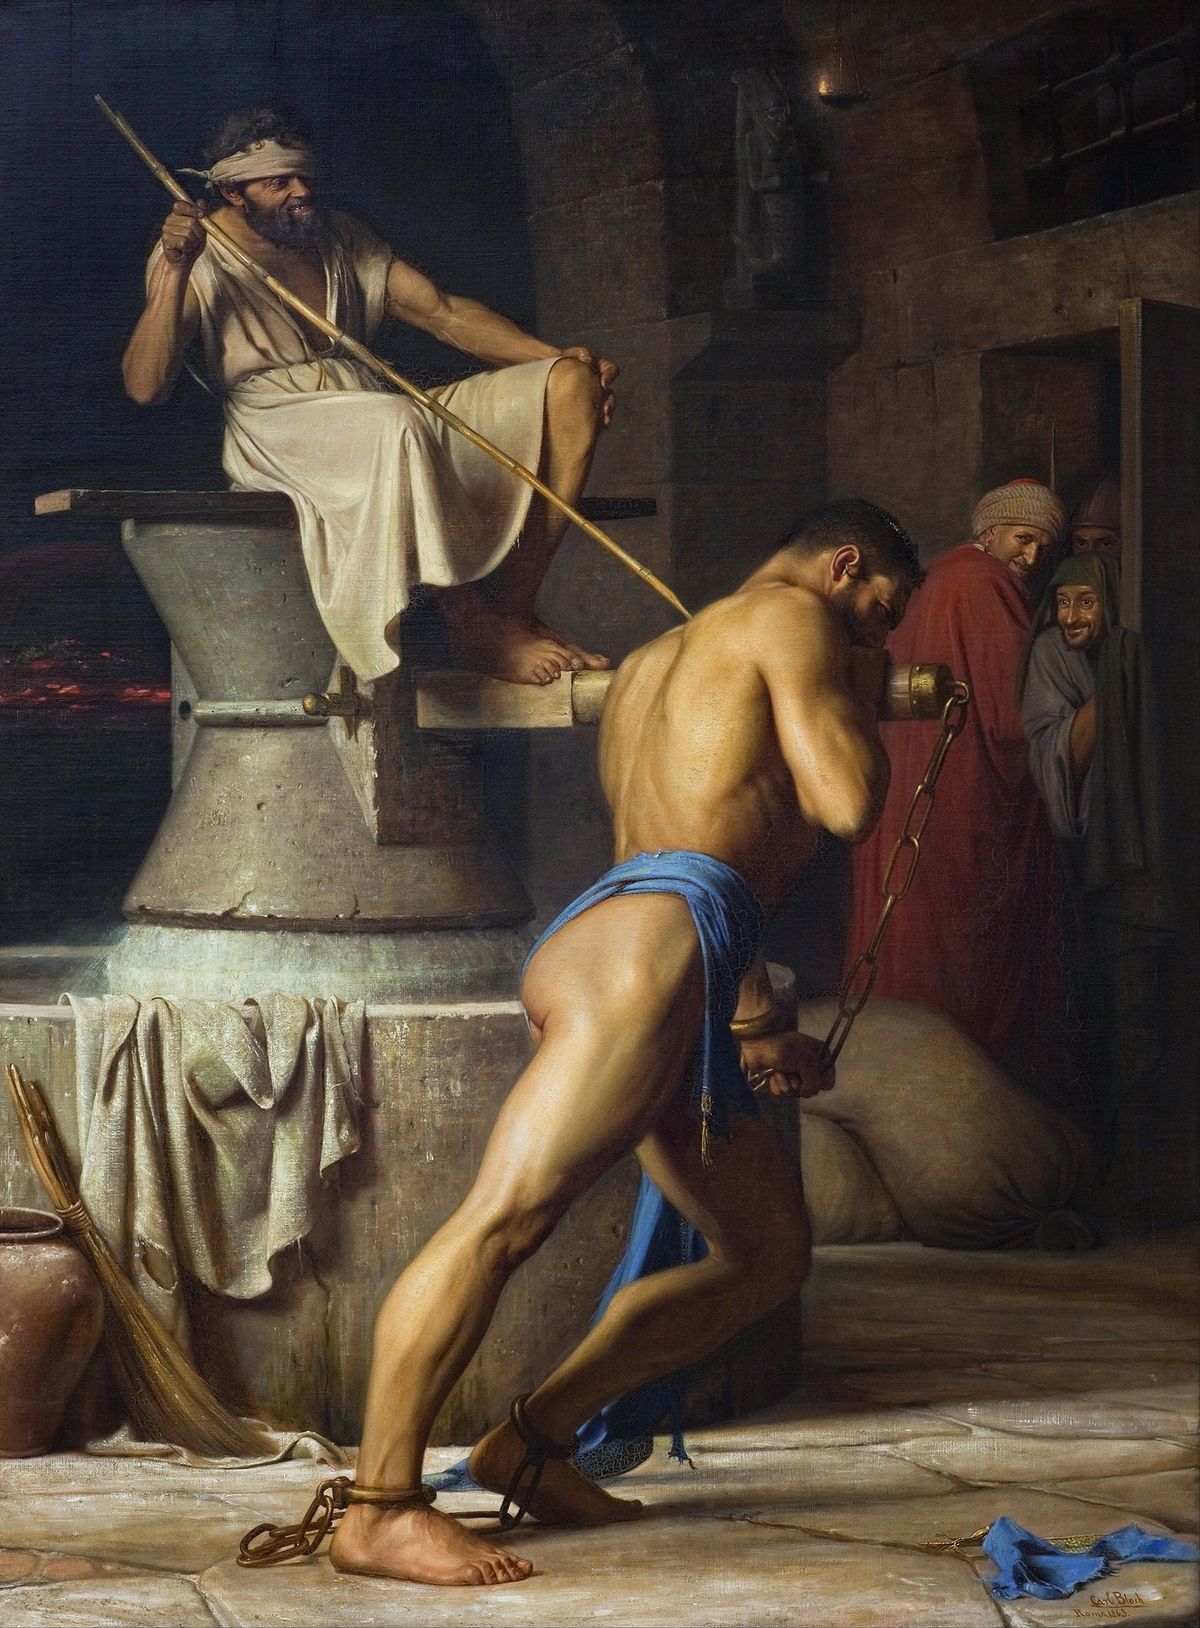 Samson and the Philistines (1863) by Carl Bloch - Public Domain Catholic Painting